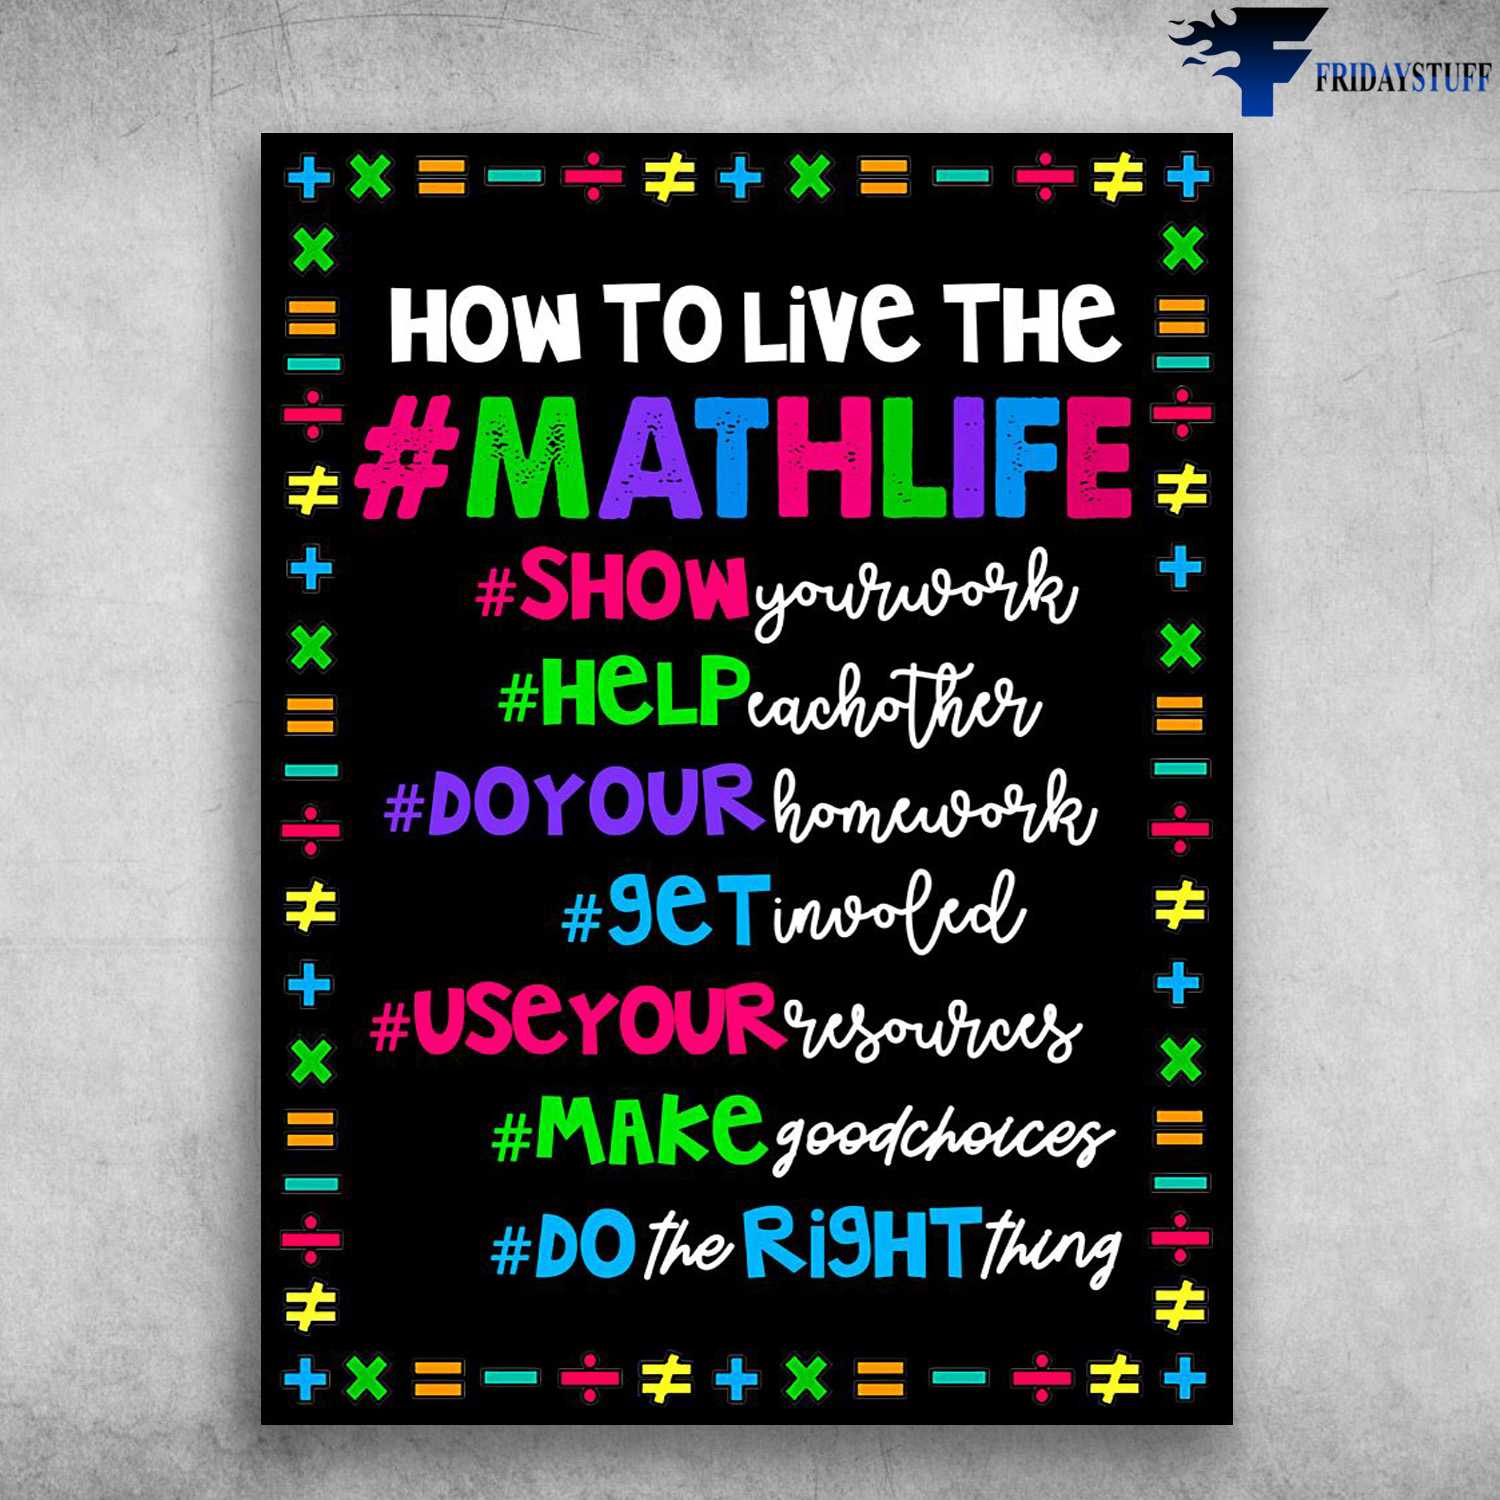 Classroom Poster - How To Live The Mathlife, Show Your Work, Help Each Other, Do Your Home Work, Get Involved